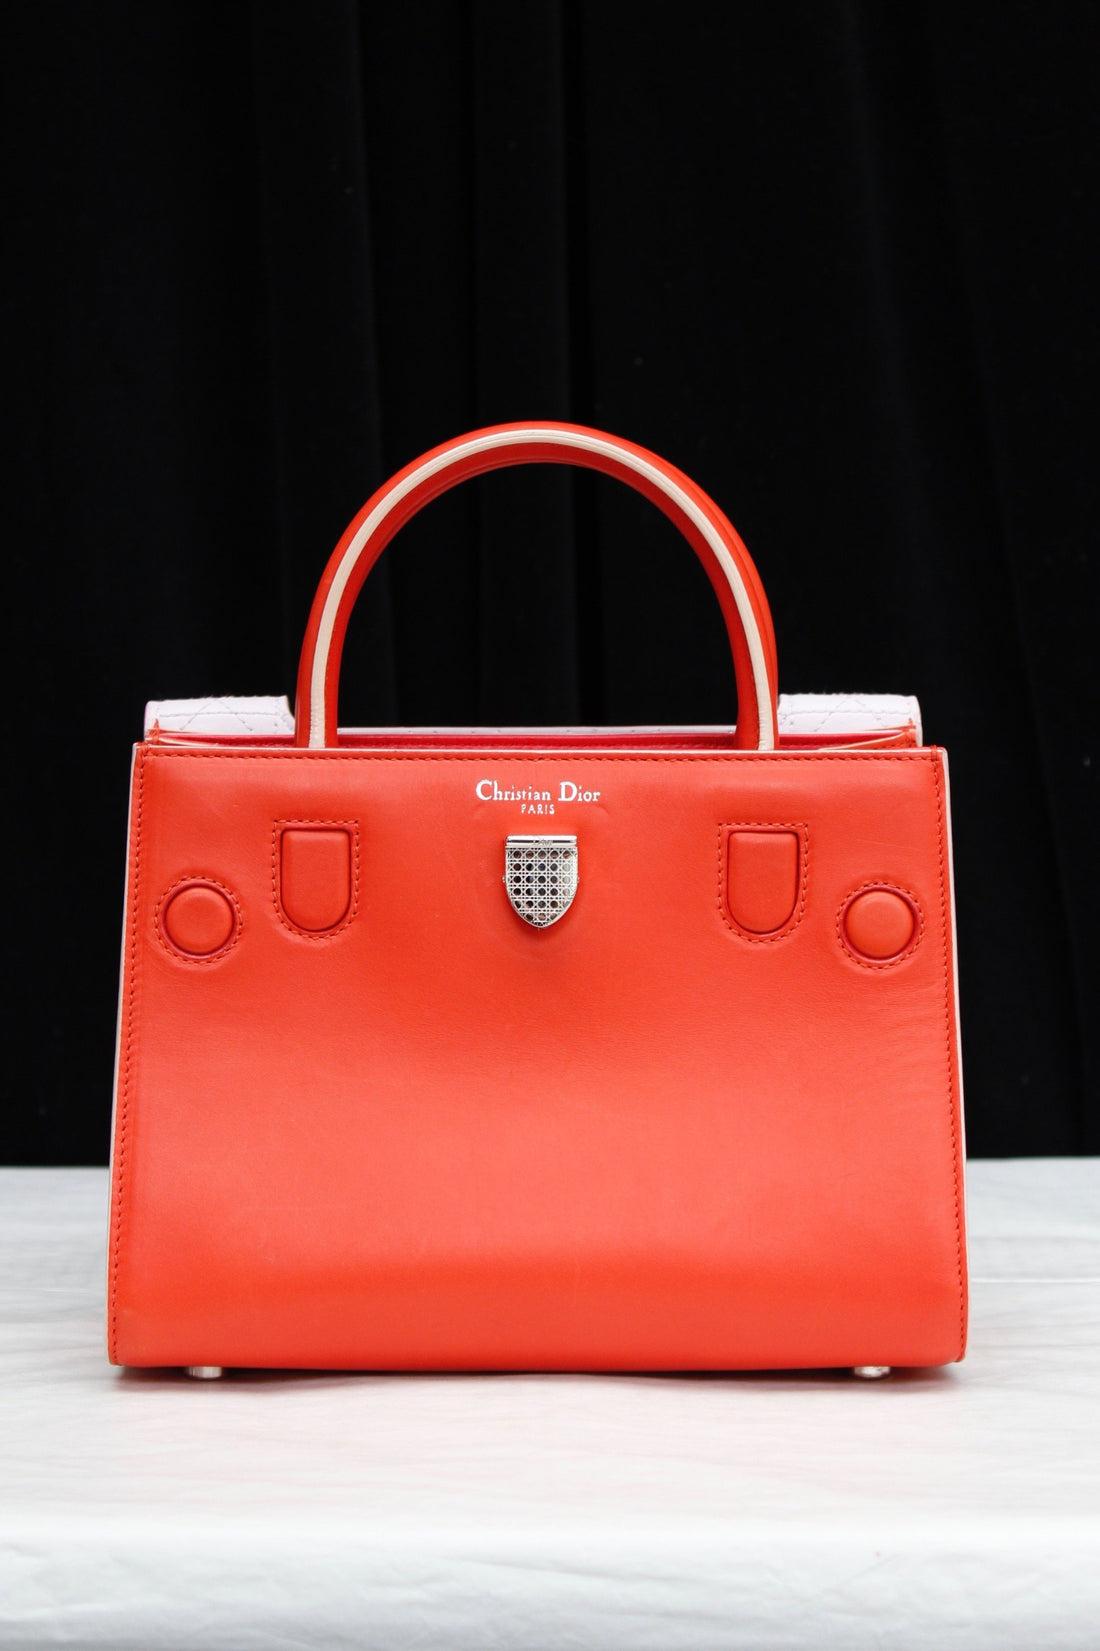 Dior Modern Leather Bag in Orange and White Leather 3